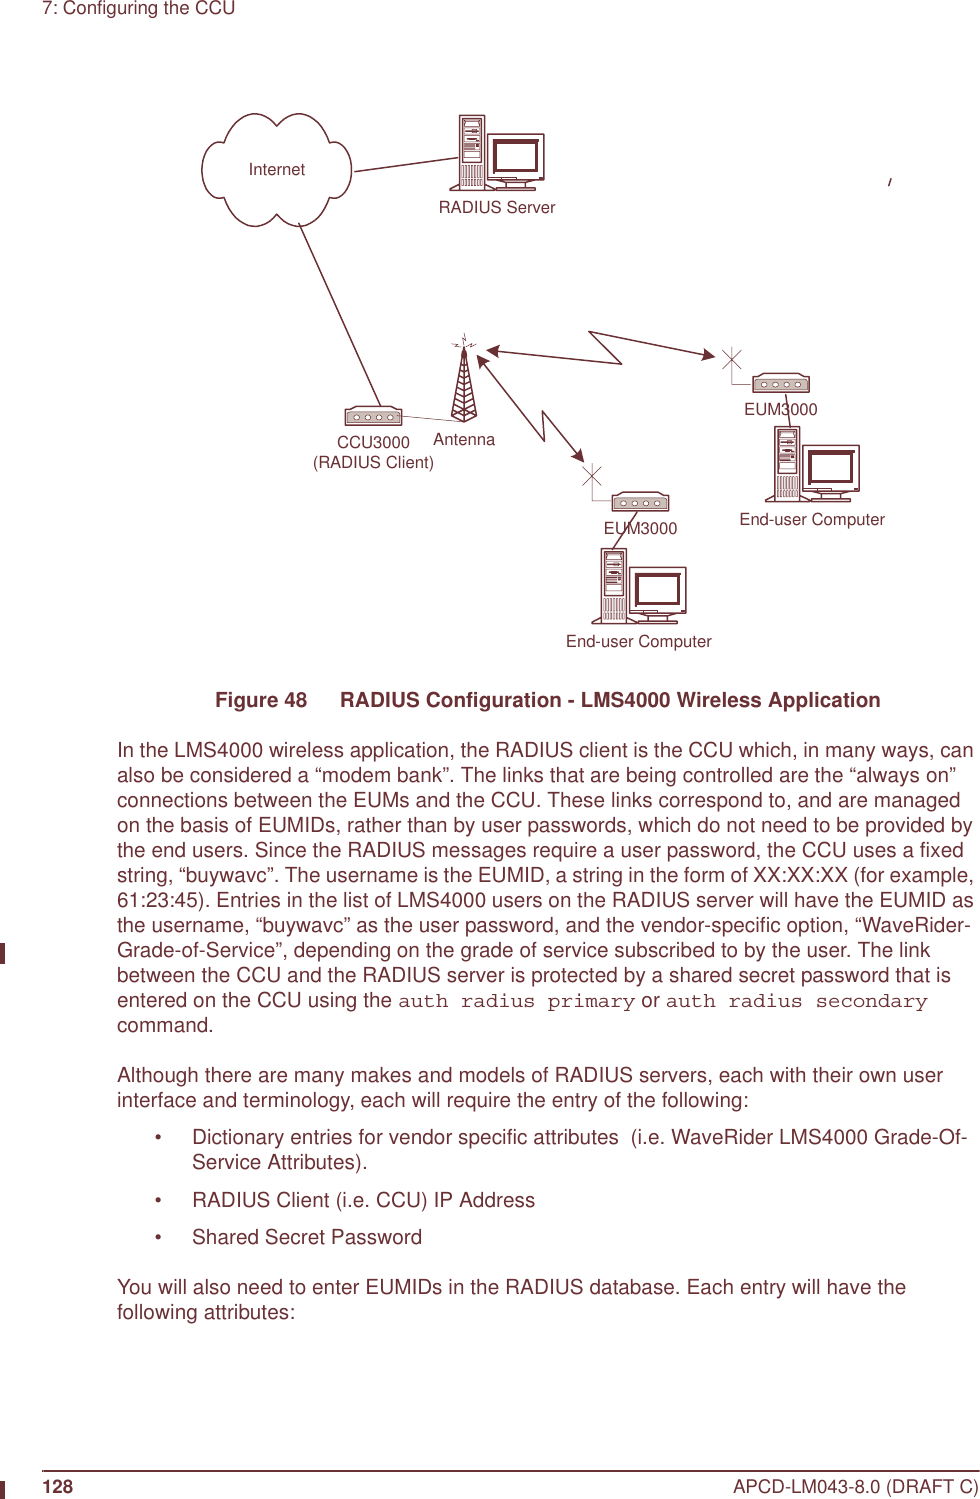 128 APCD-LM043-8.0 (DRAFT C)7: Configuring the CCUFigure 48   RADIUS Configuration - LMS4000 Wireless ApplicationIn the LMS4000 wireless application, the RADIUS client is the CCU which, in many ways, can also be considered a “modem bank”. The links that are being controlled are the “always on” connections between the EUMs and the CCU. These links correspond to, and are managed on the basis of EUMIDs, rather than by user passwords, which do not need to be provided by the end users. Since the RADIUS messages require a user password, the CCU uses a fixed string, “buywavc”. The username is the EUMID, a string in the form of XX:XX:XX (for example, 61:23:45). Entries in the list of LMS4000 users on the RADIUS server will have the EUMID as the username, “buywavc” as the user password, and the vendor-specific option, “WaveRider-Grade-of-Service”, depending on the grade of service subscribed to by the user. The link between the CCU and the RADIUS server is protected by a shared secret password that is entered on the CCU using the auth radius primary or auth radius secondary command.Although there are many makes and models of RADIUS servers, each with their own user interface and terminology, each will require the entry of the following:• Dictionary entries for vendor specific attributes  (i.e. WaveRider LMS4000 Grade-Of-Service Attributes). • RADIUS Client (i.e. CCU) IP Address• Shared Secret PasswordYou will also need to enter EUMIDs in the RADIUS database. Each entry will have the following attributes:RADIUS ServerInternetEUM3000EUM3000 End-user ComputerEnd-user ComputerCCU3000(RADIUS Client)Antenna